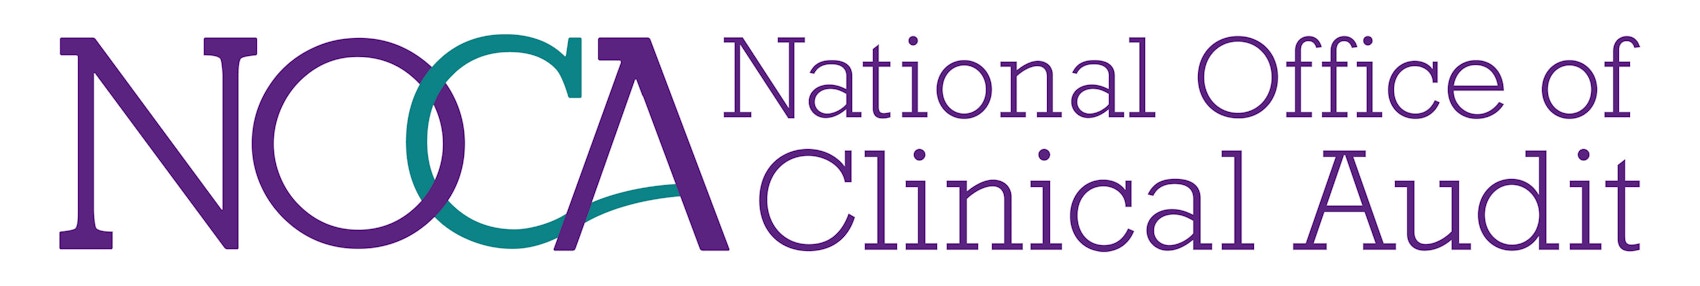 Call out for request for tenders for the NOCA National Clinical Audit Platform 